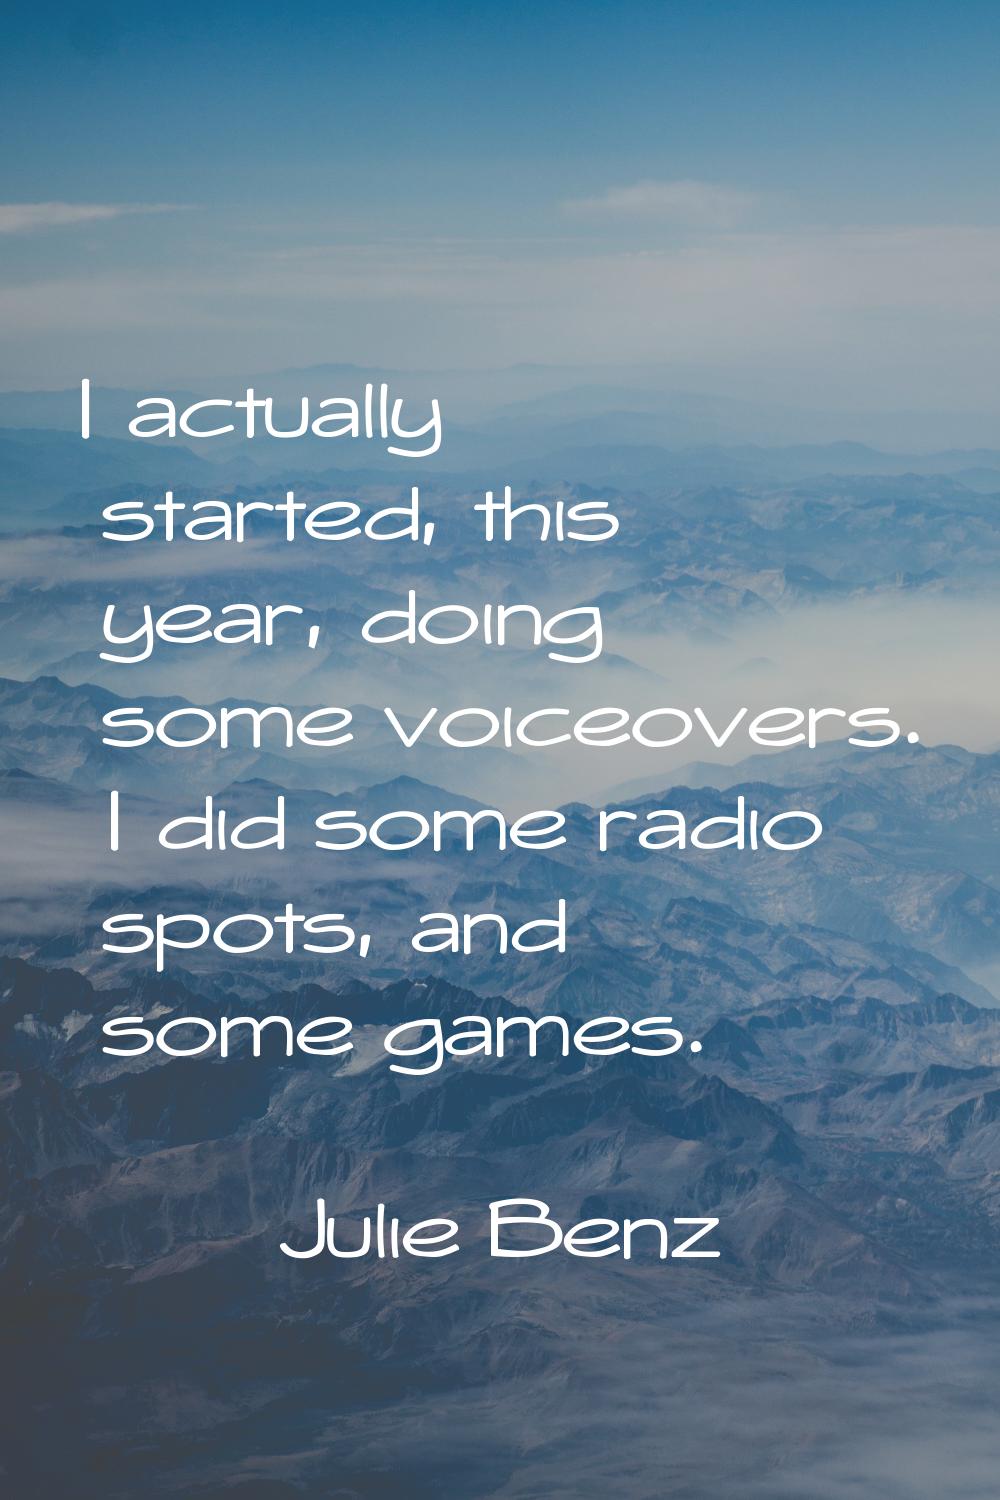 I actually started, this year, doing some voiceovers. I did some radio spots, and some games.